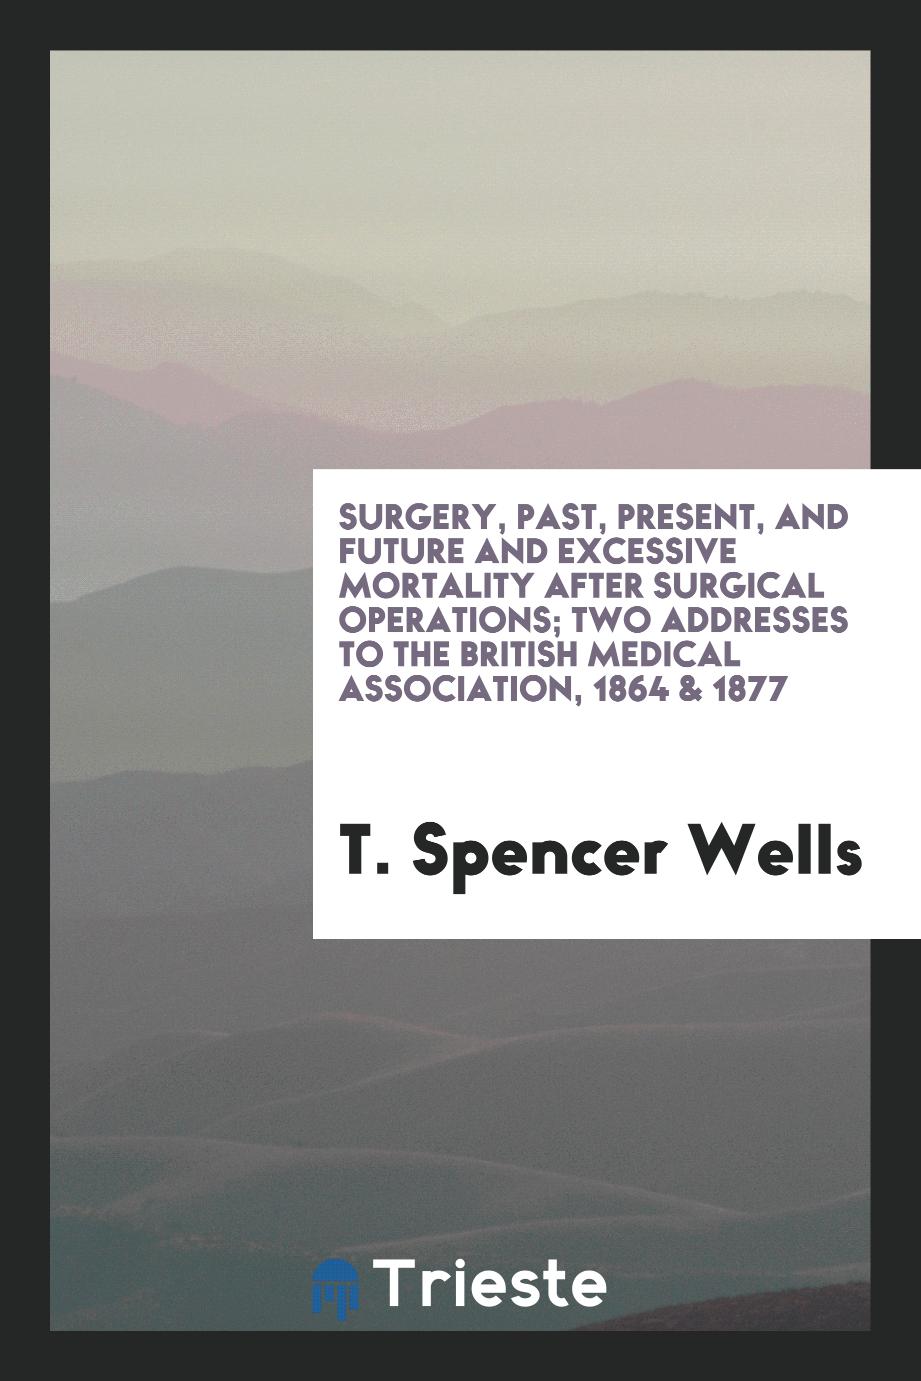 Surgery, past, present, and future and excessive mortality after surgical operations; Two Addresses to the British Medical Association, 1864 & 1877